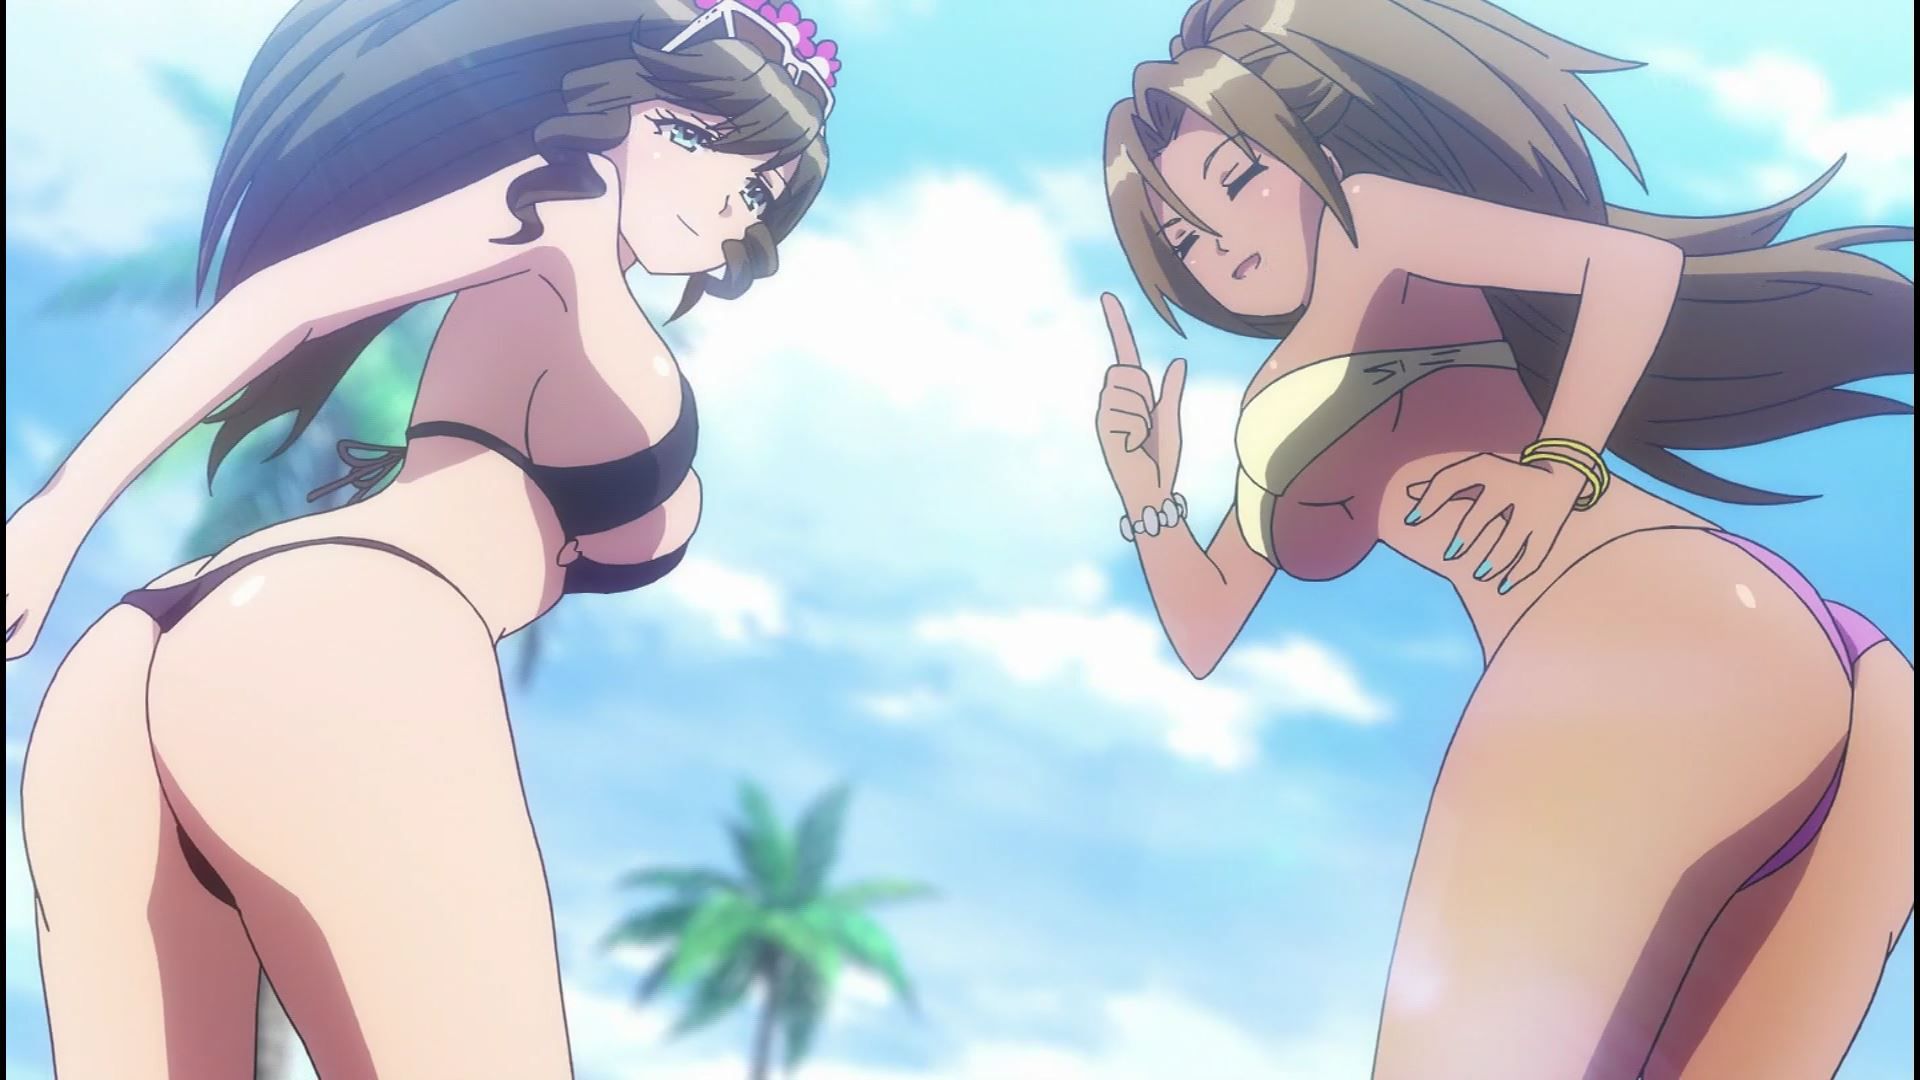 Anime [Kandagawa JETGIRLS] 6 episodes, such as girls' very cute swimsuit and naked! 18